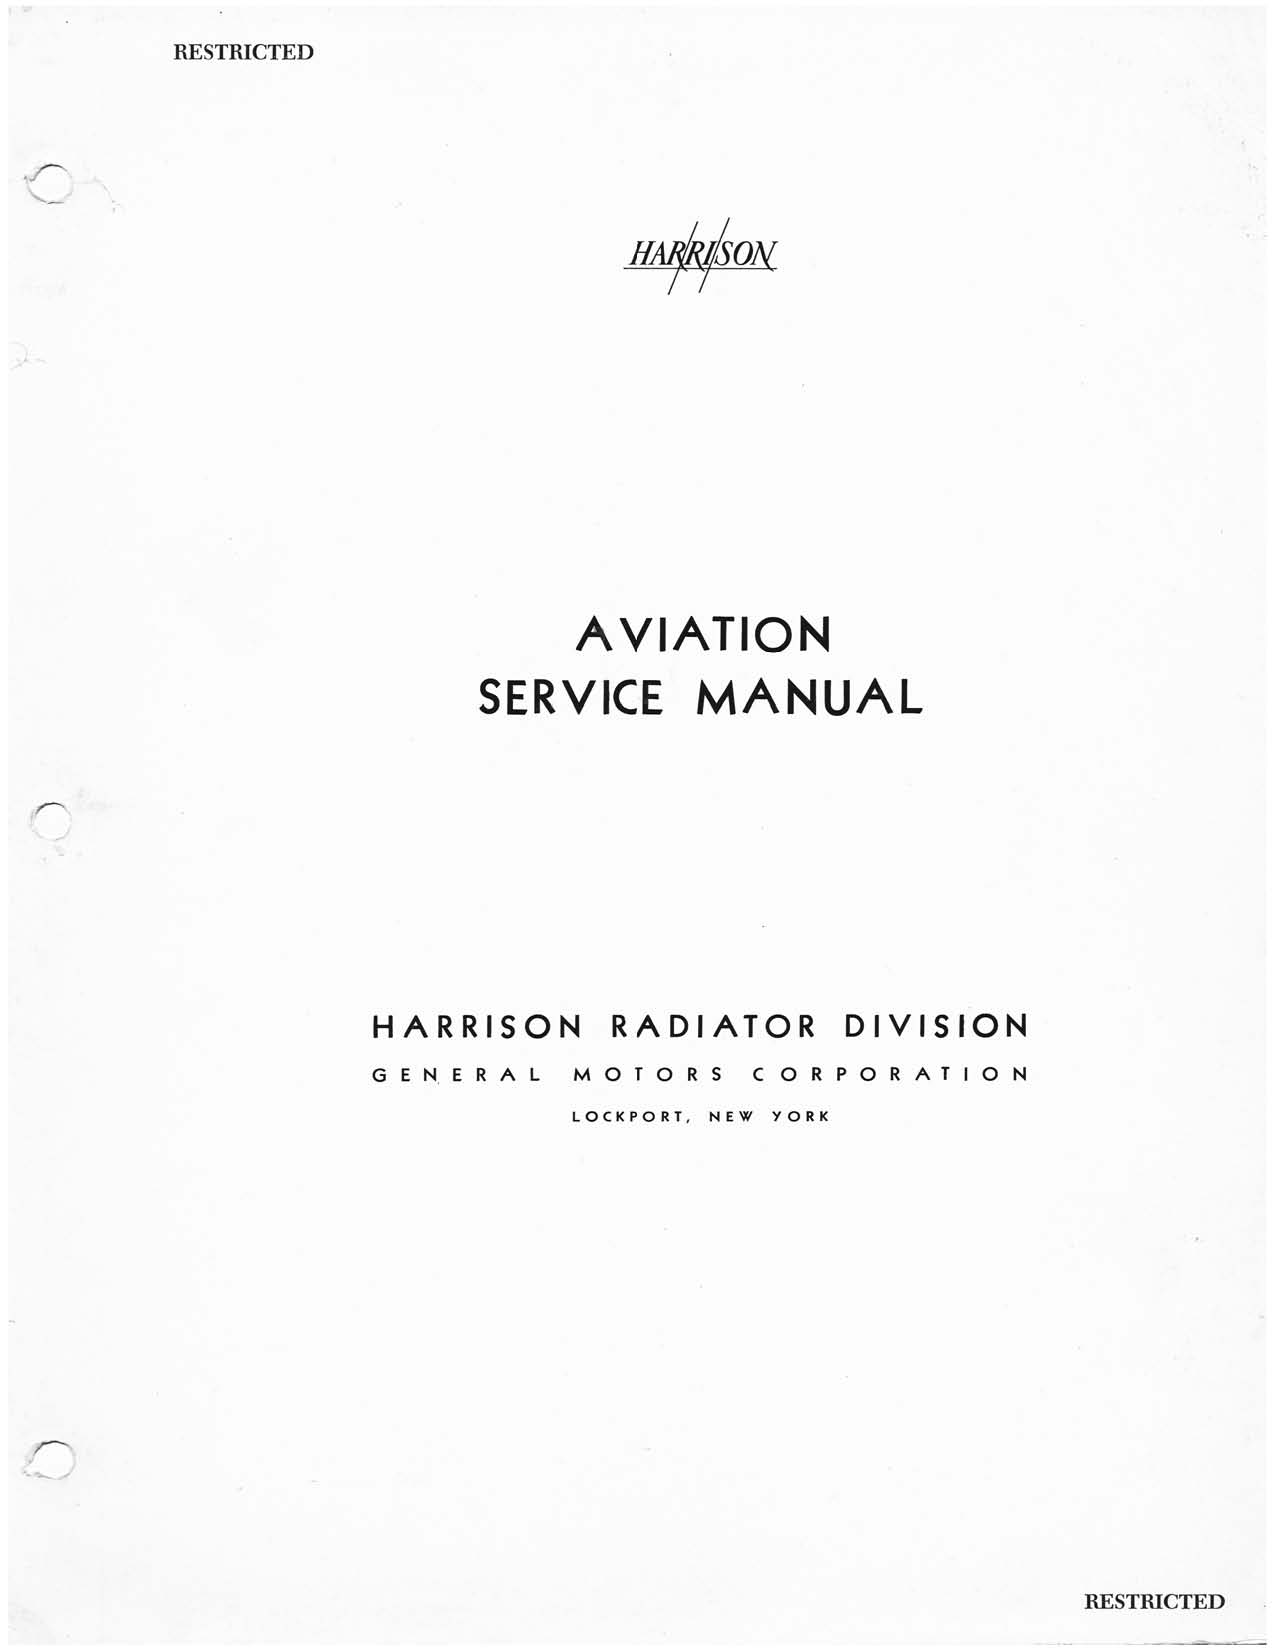 Sample page 1 from AirCorps Library document: Aviation Service Manual for Harrison Oil Coolers